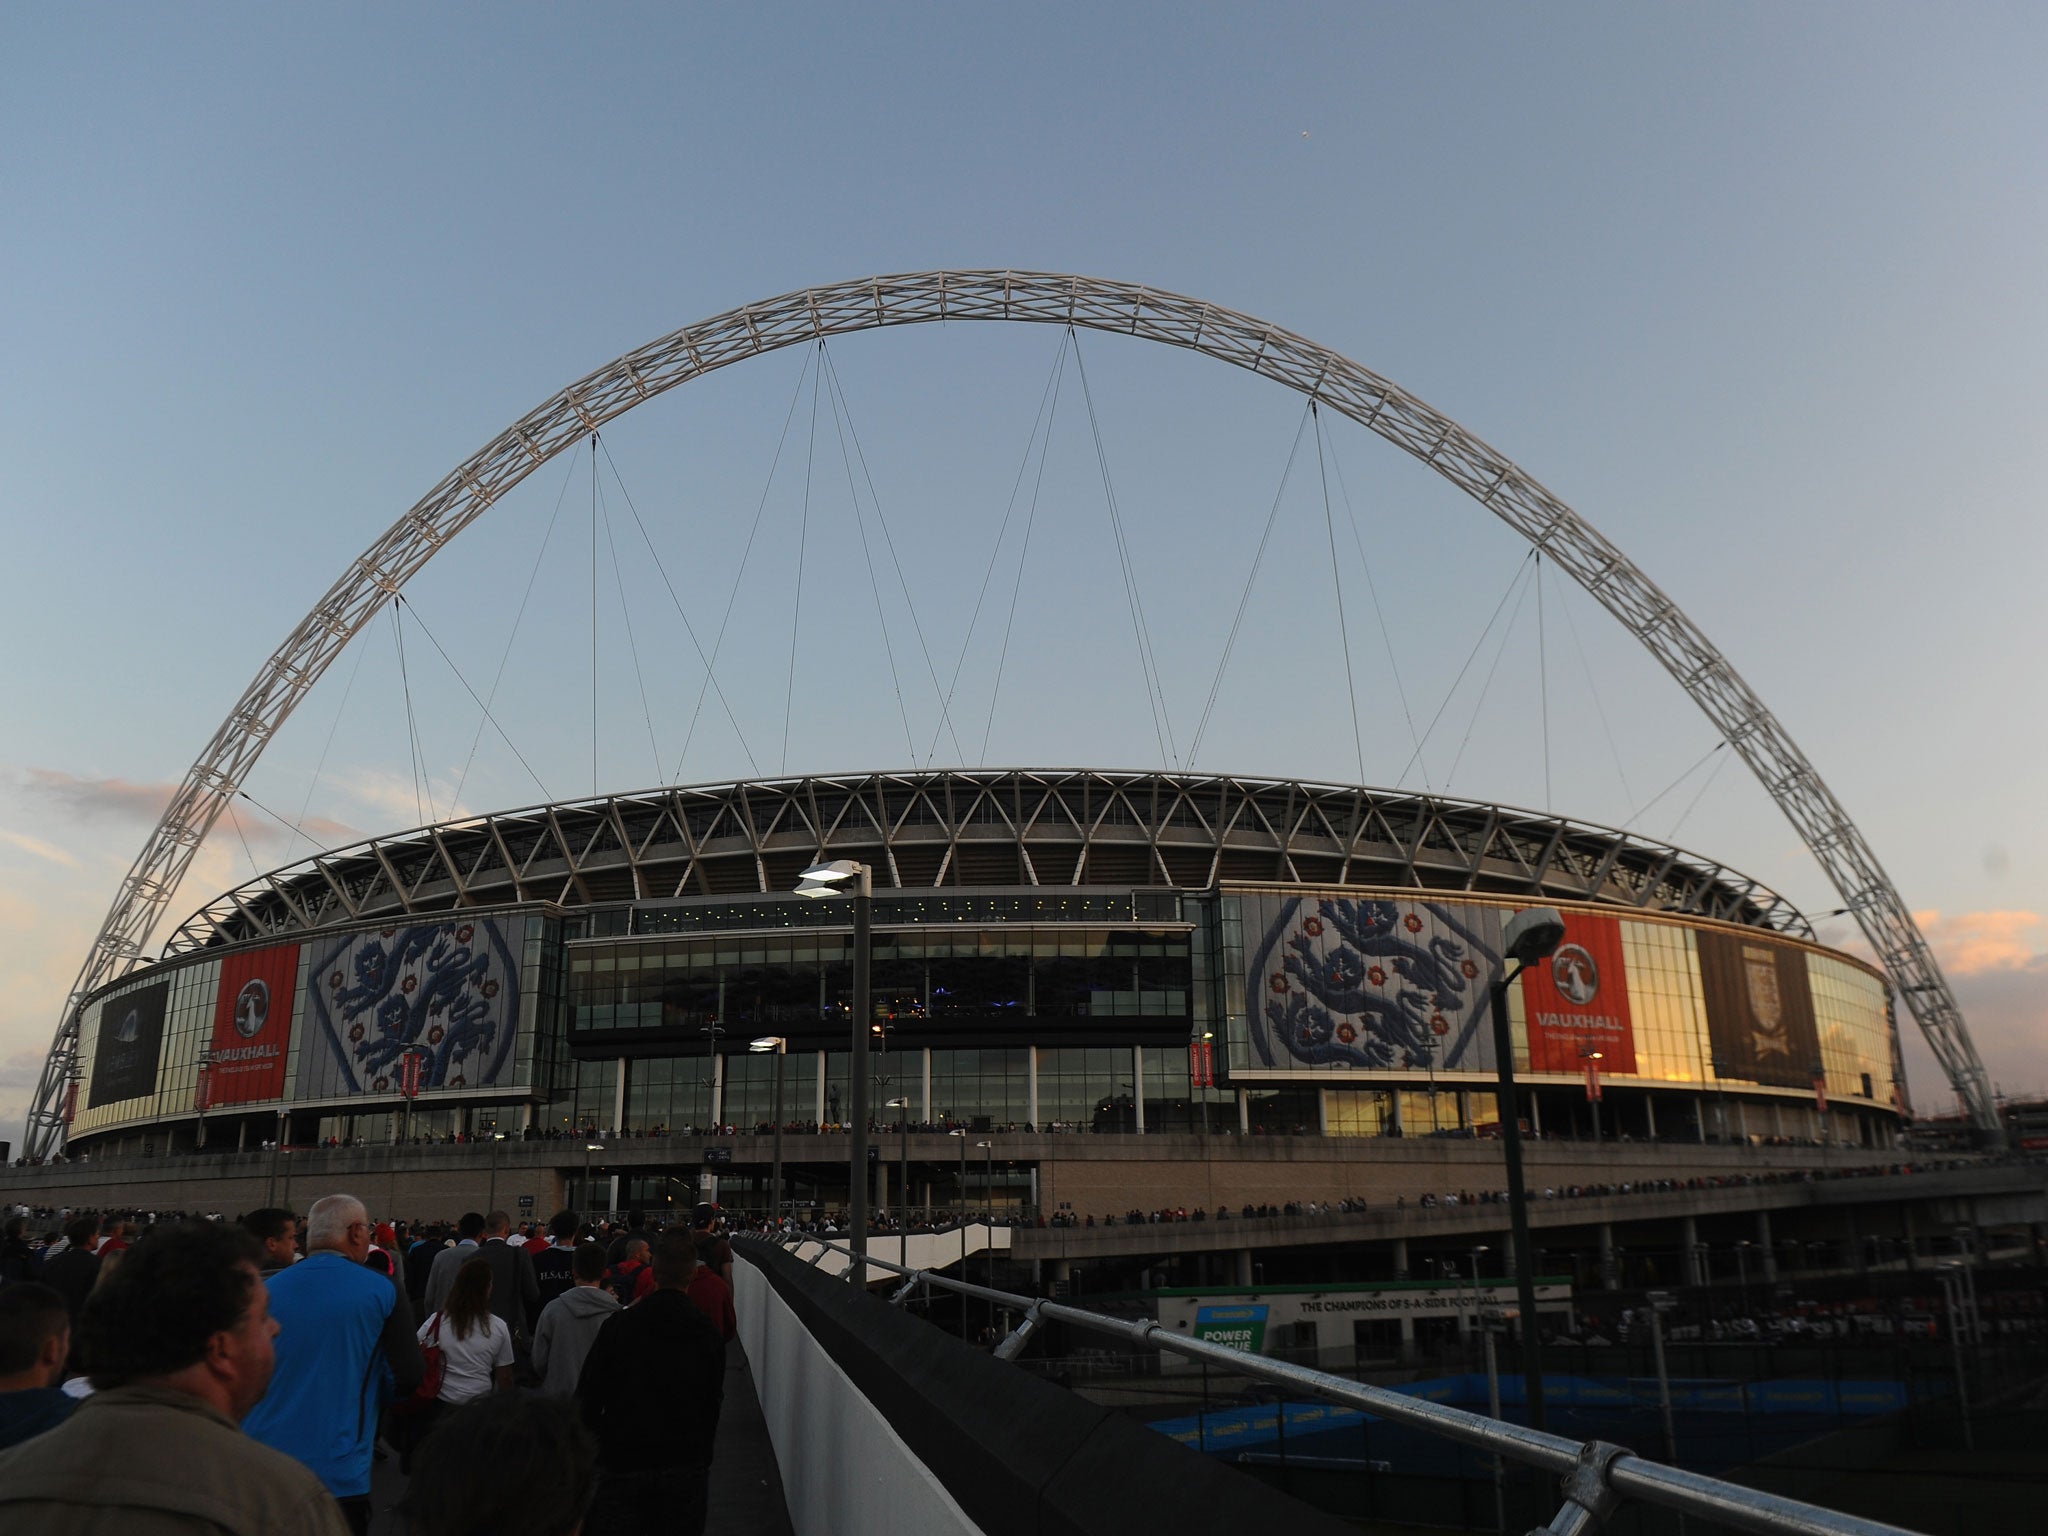 A view of Wembley Stadium